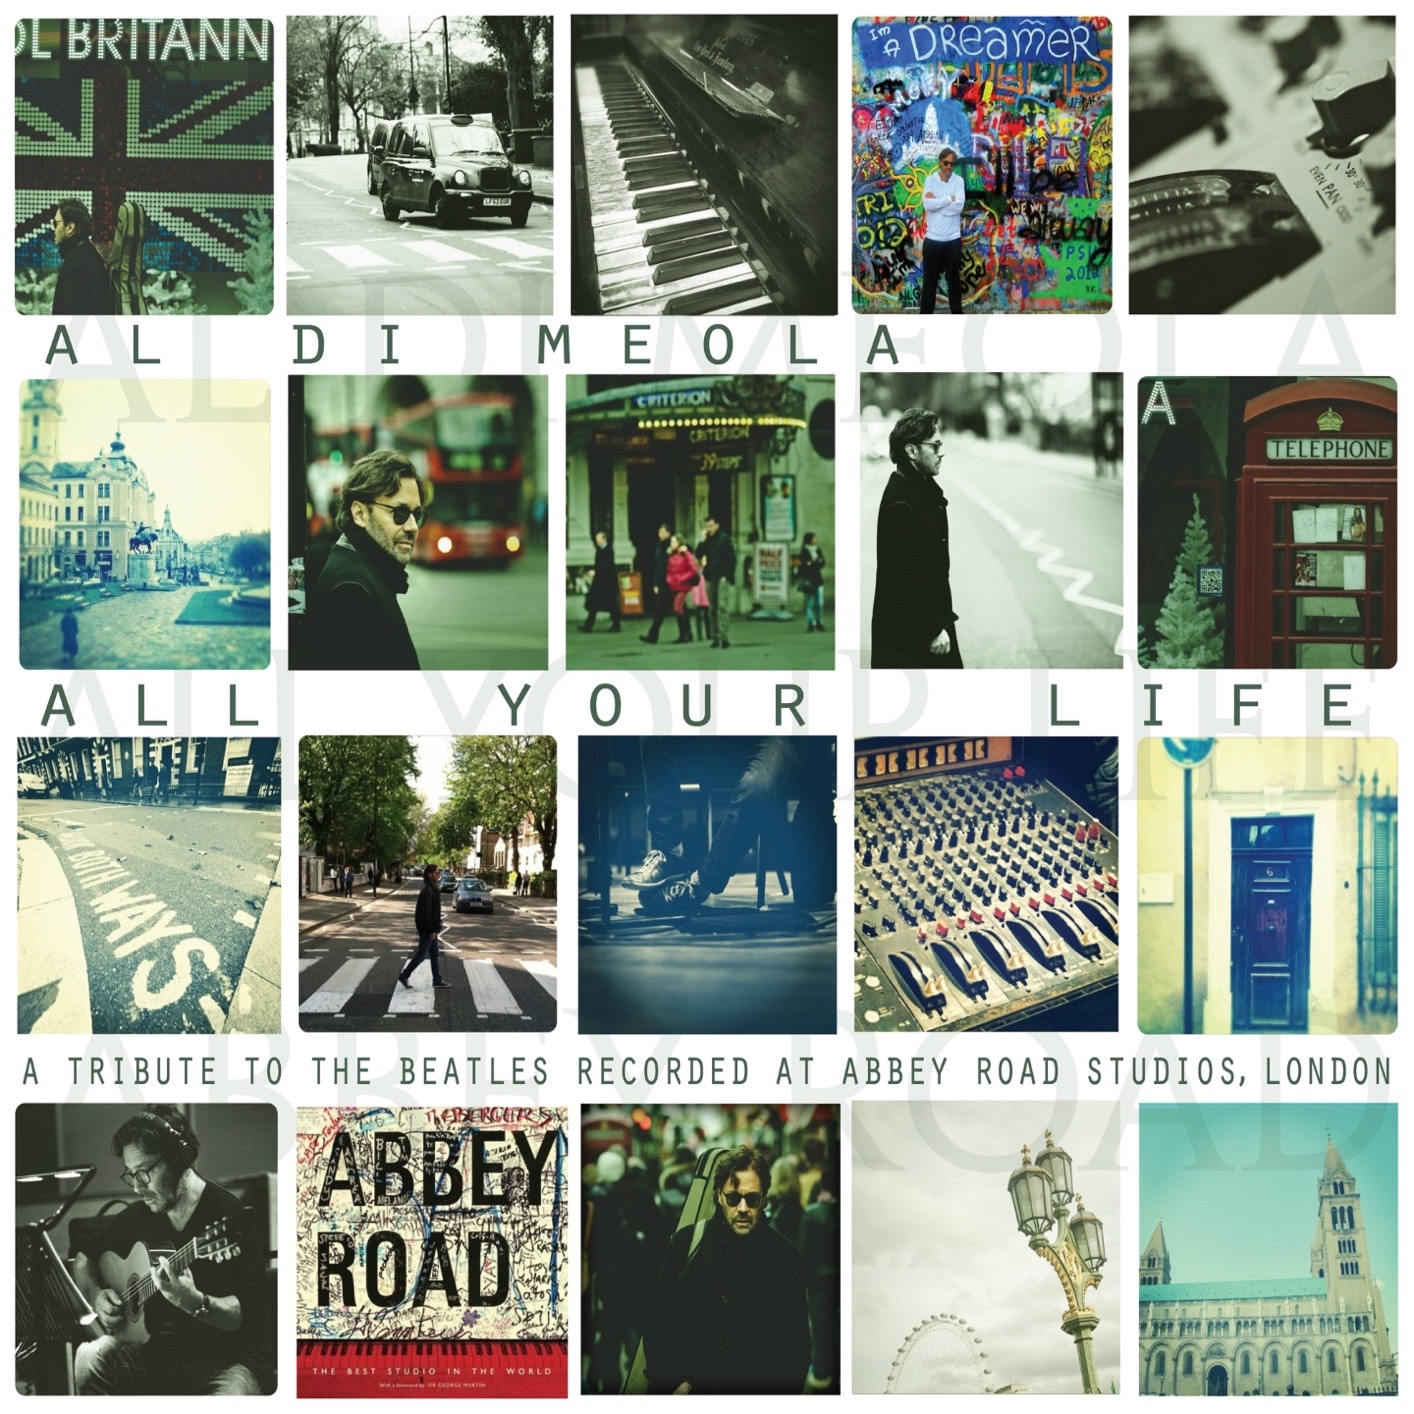 Al Di Meola – All Your Life “A Tribute To The Beatles” (2013/2019) [FLAC 24bit/96kHz]